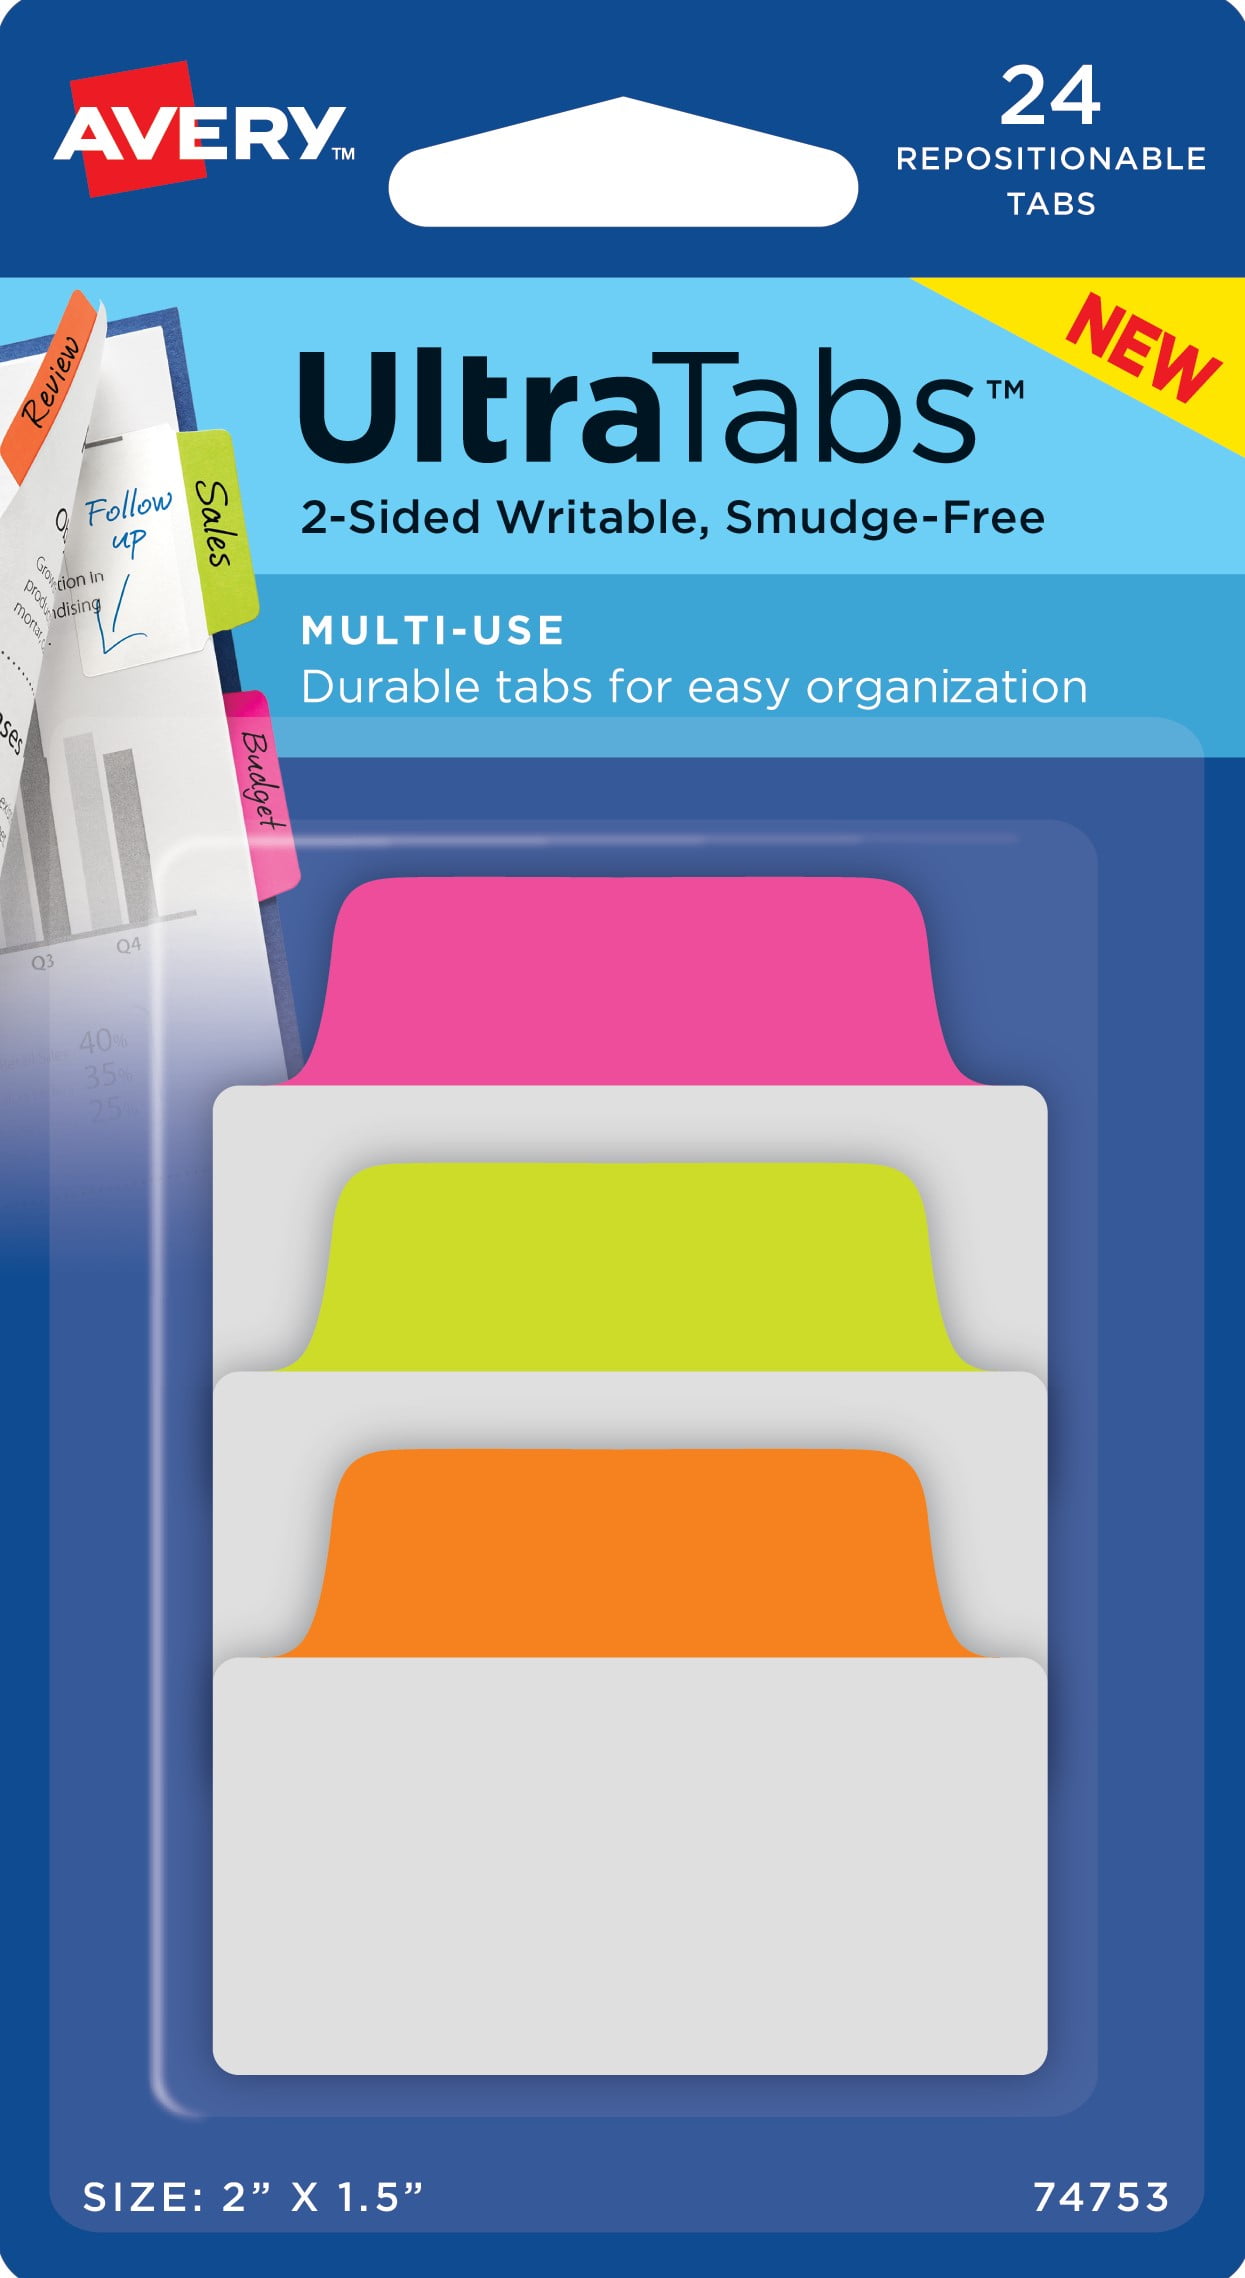 Avery Ultra Tabs, Multi-use Style, 2" x 1.5", Assorted Neon Colors, 24 Tabs (44753)